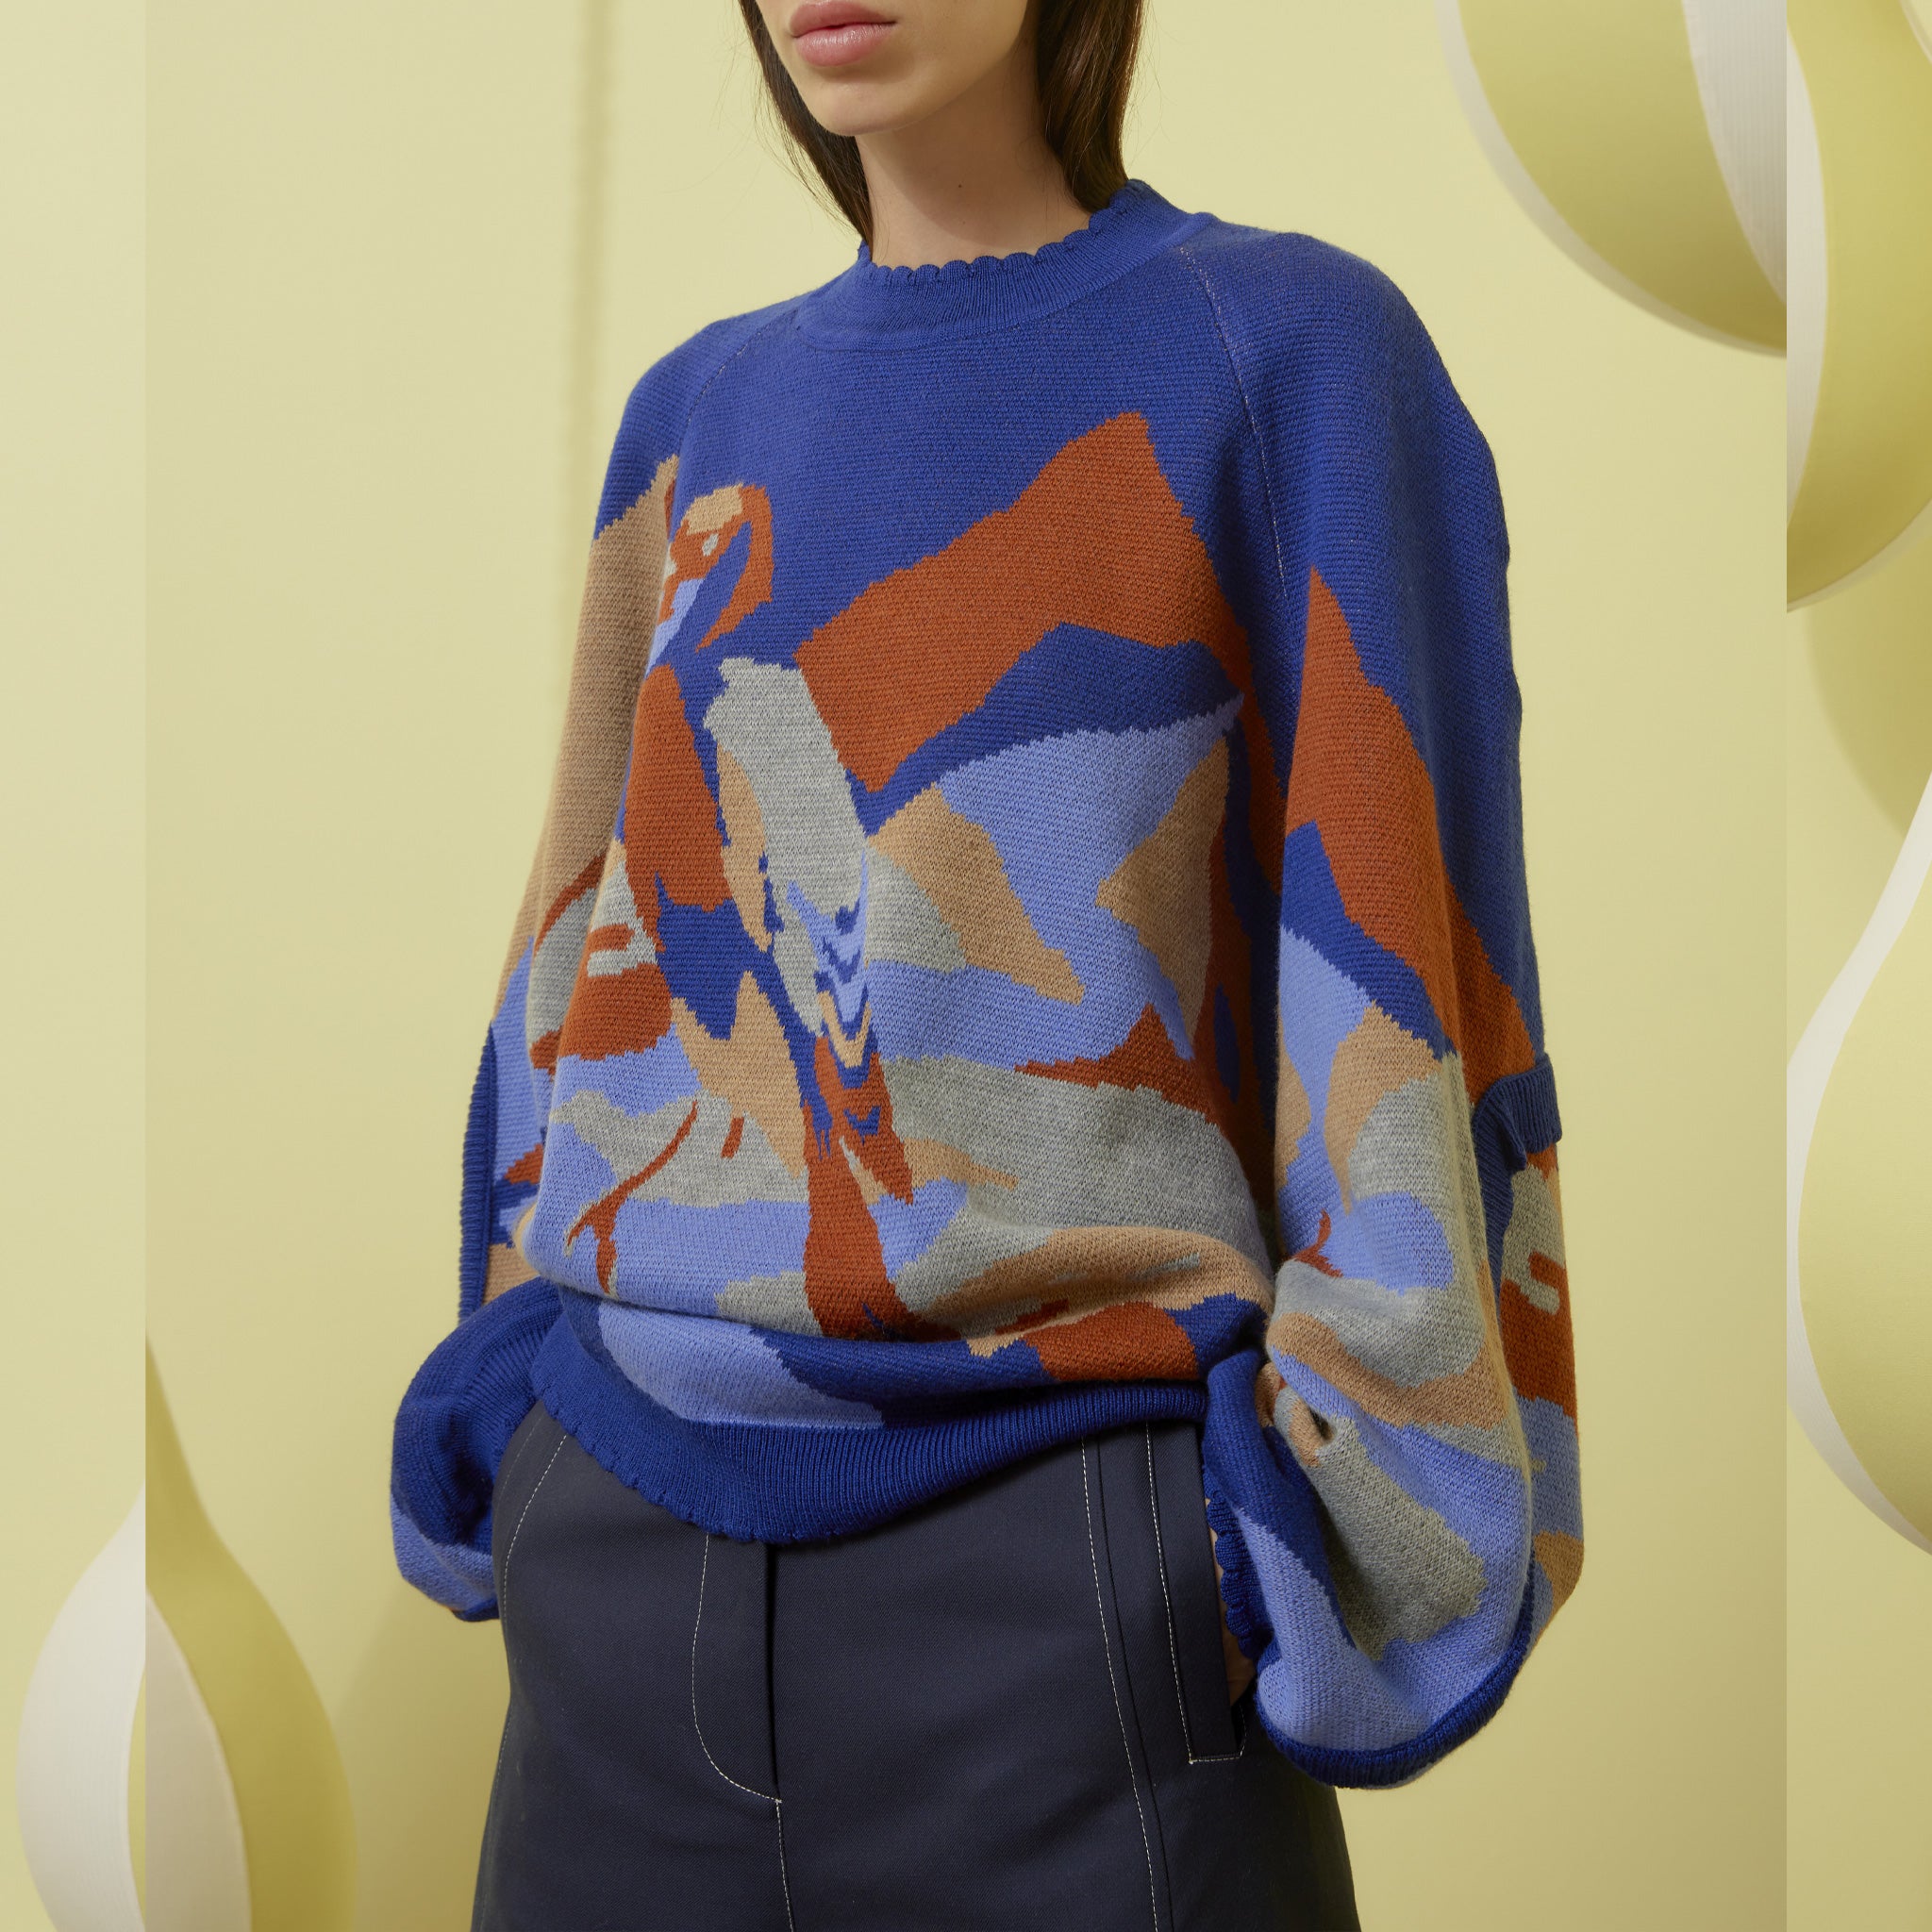 A model wears the blue oversized Stamp Sweater with abstract knit graphics in orange and grey.